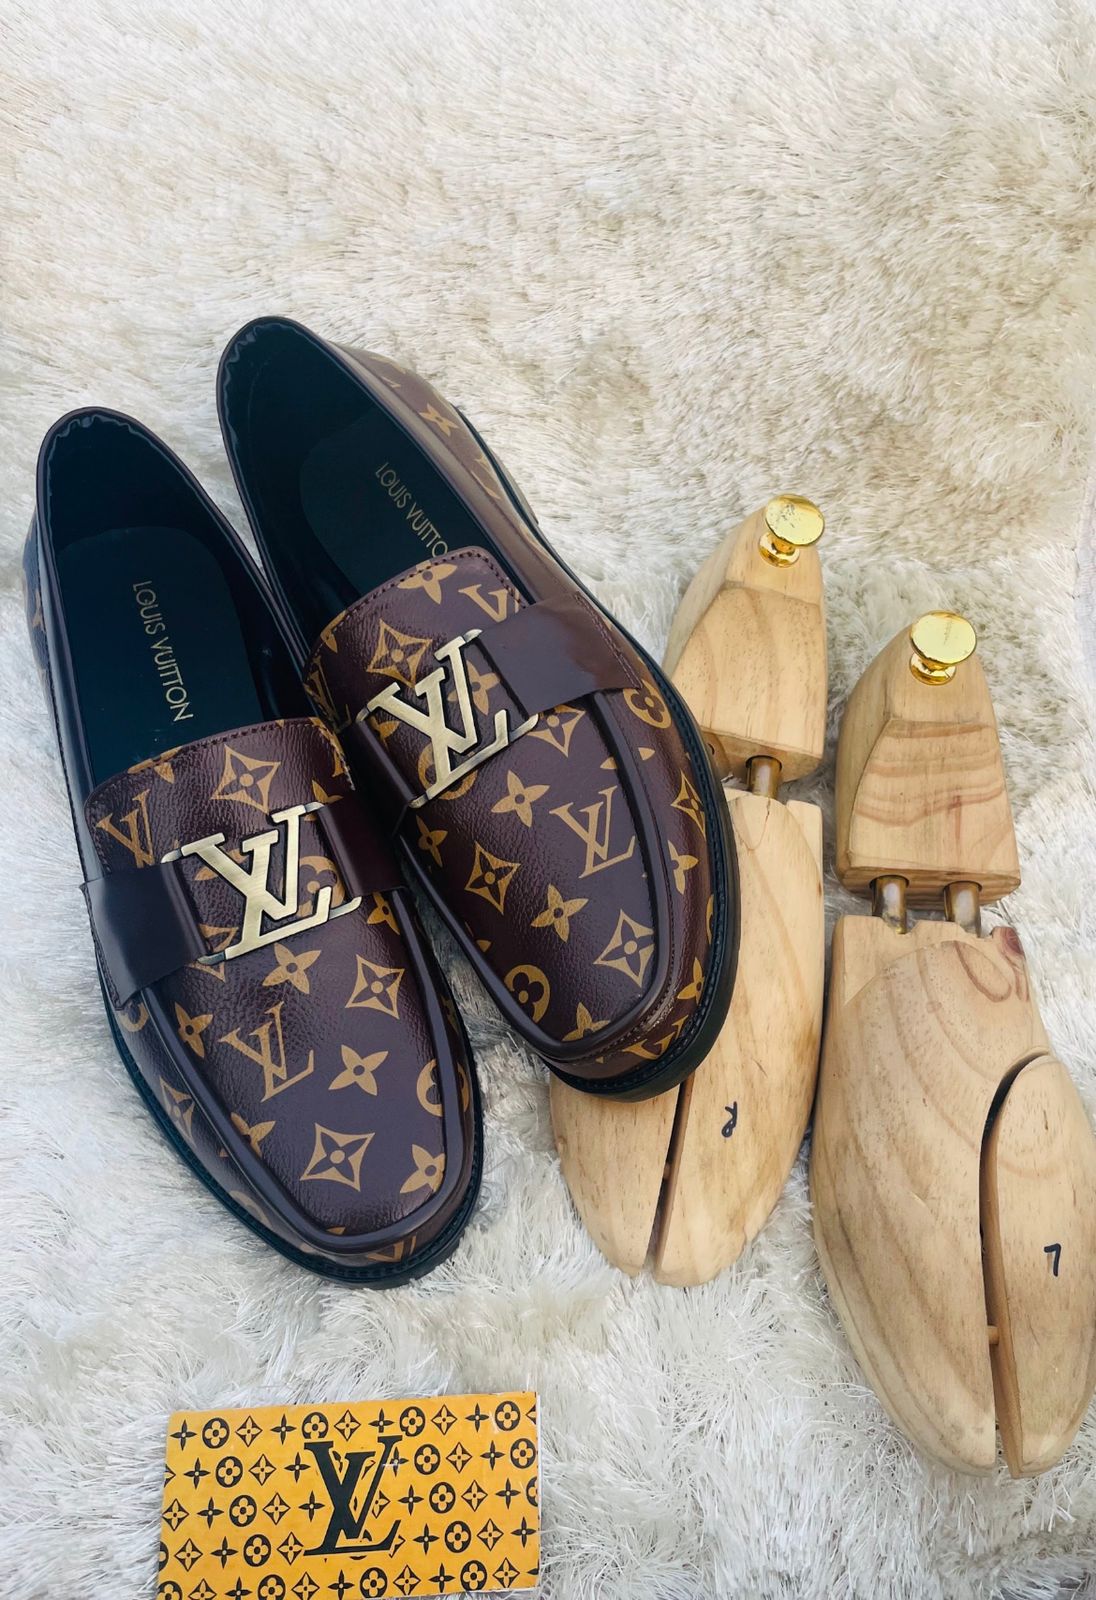 LV Formal Shoes First Copy India 1:1 Super Clone Quality